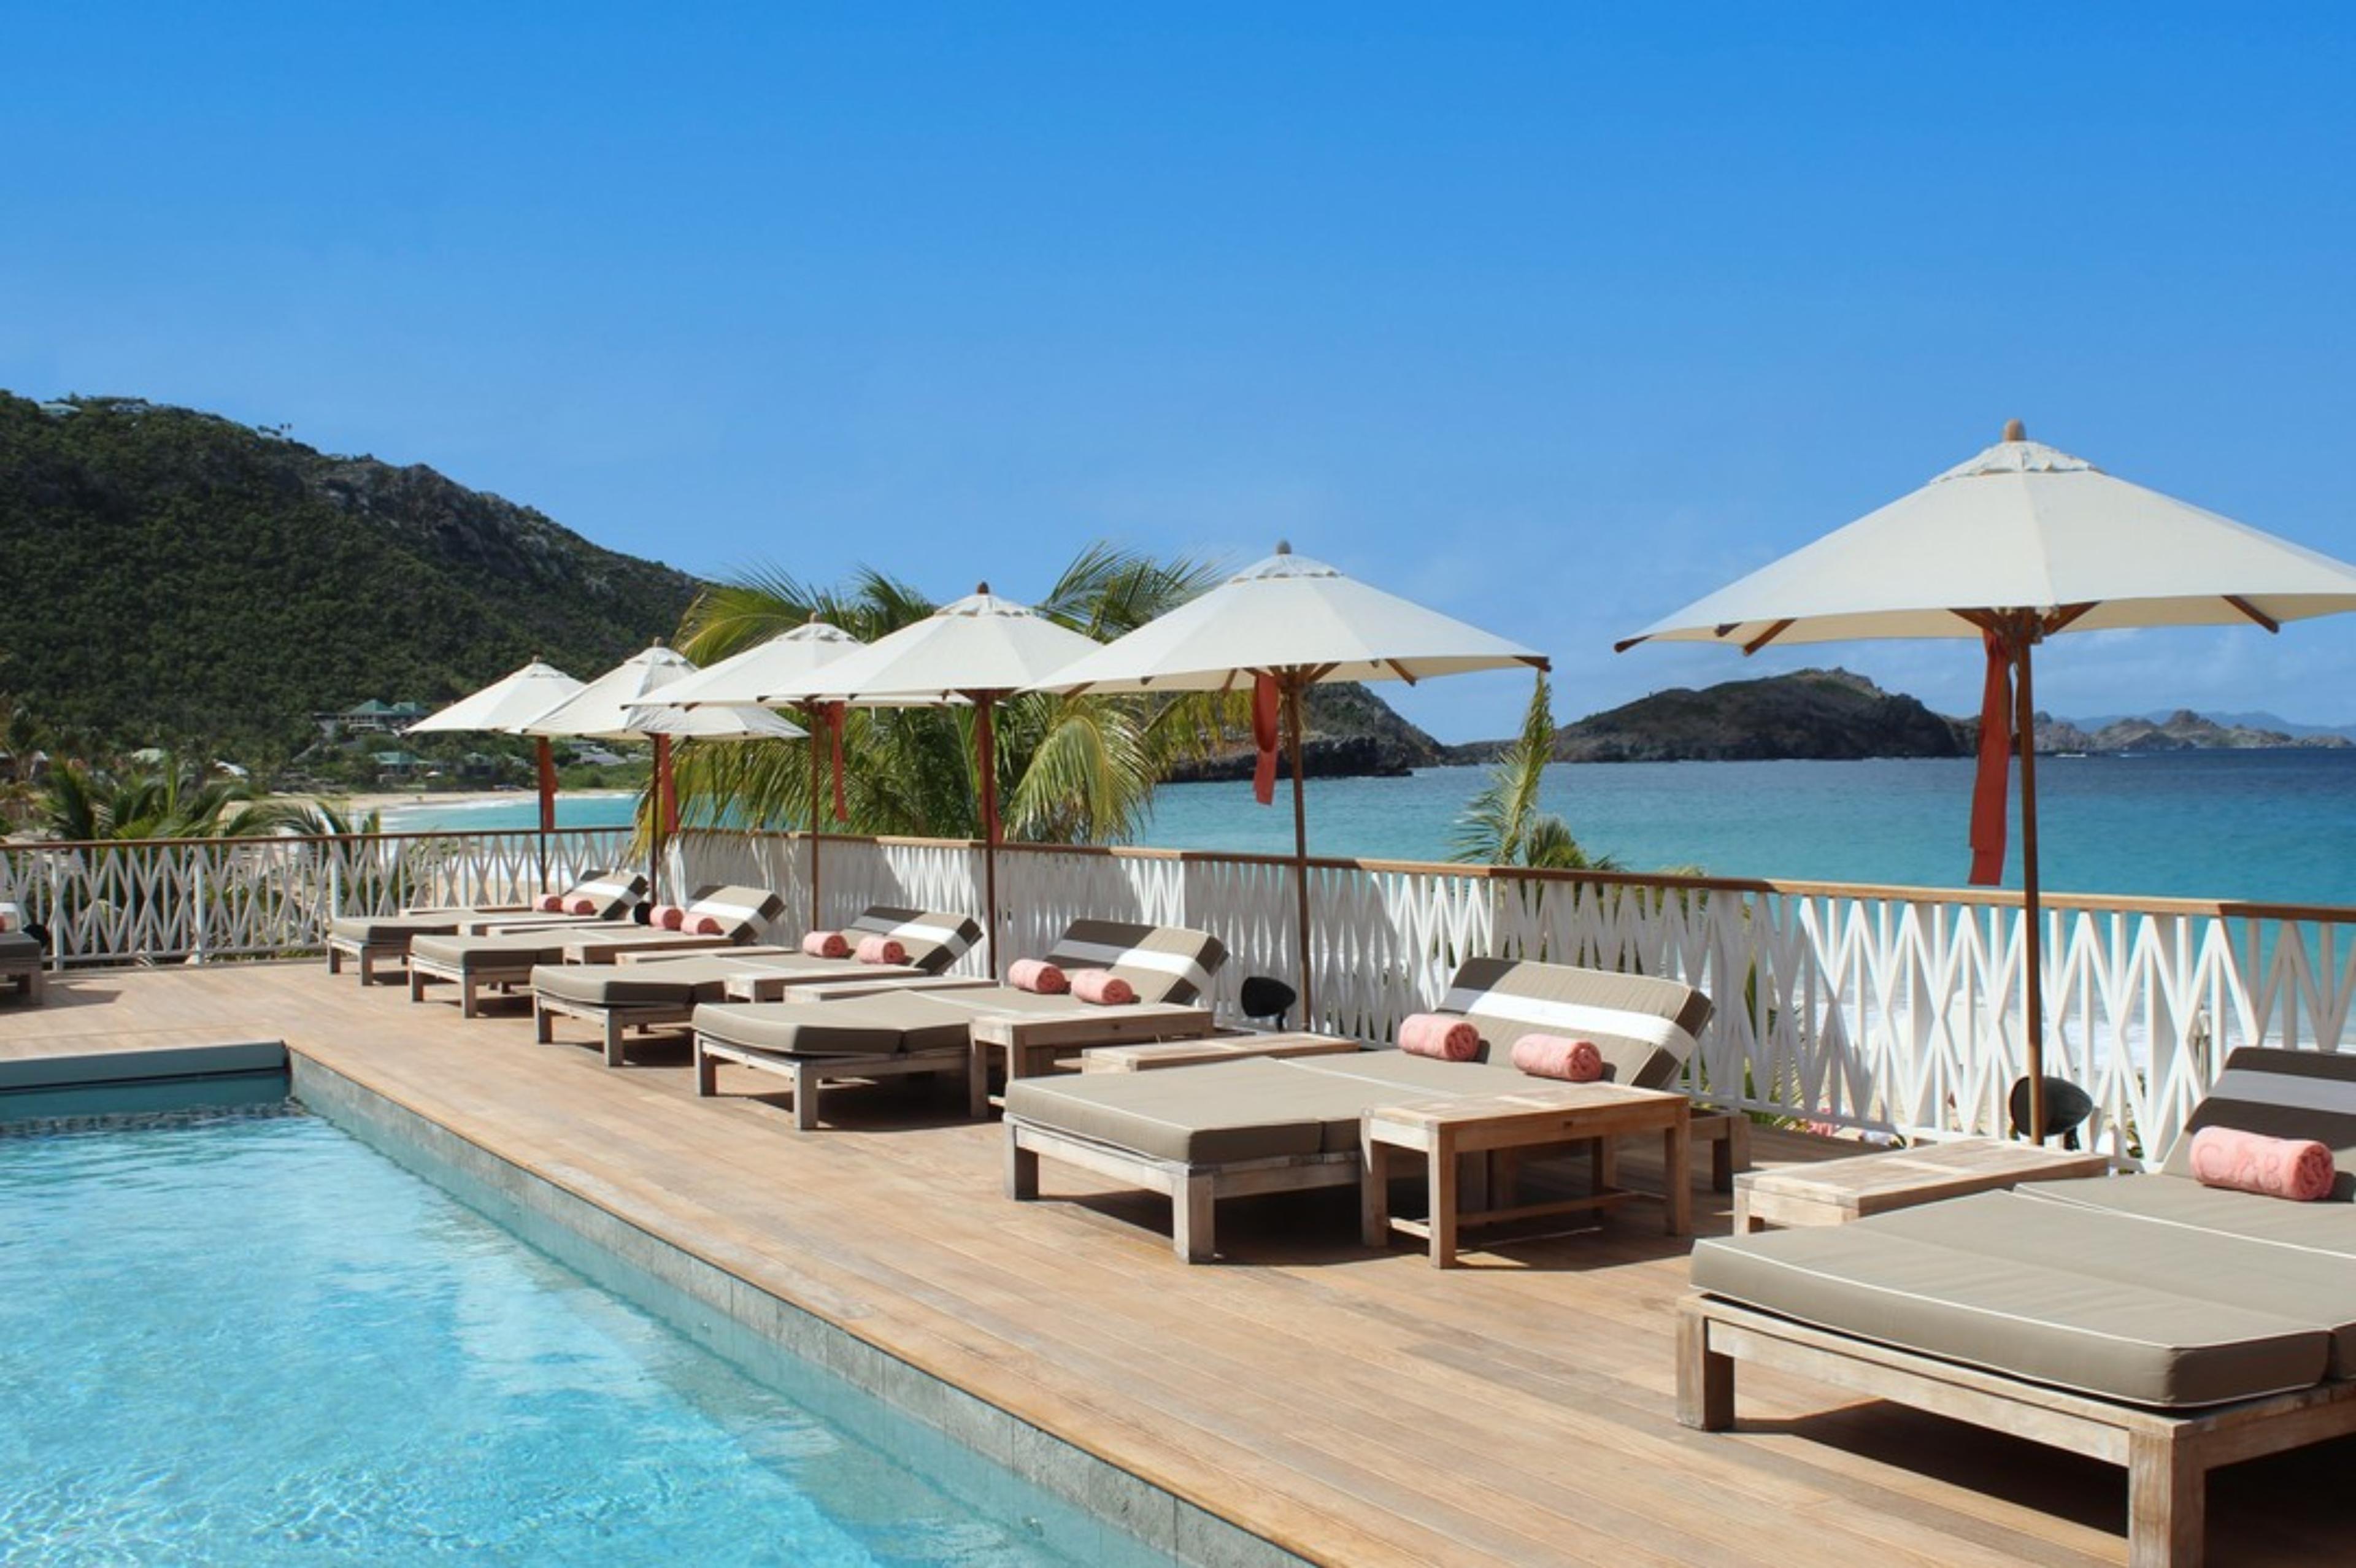 Cheval Blanc St-Barth Isle De France in Saint Barth, French West Indies